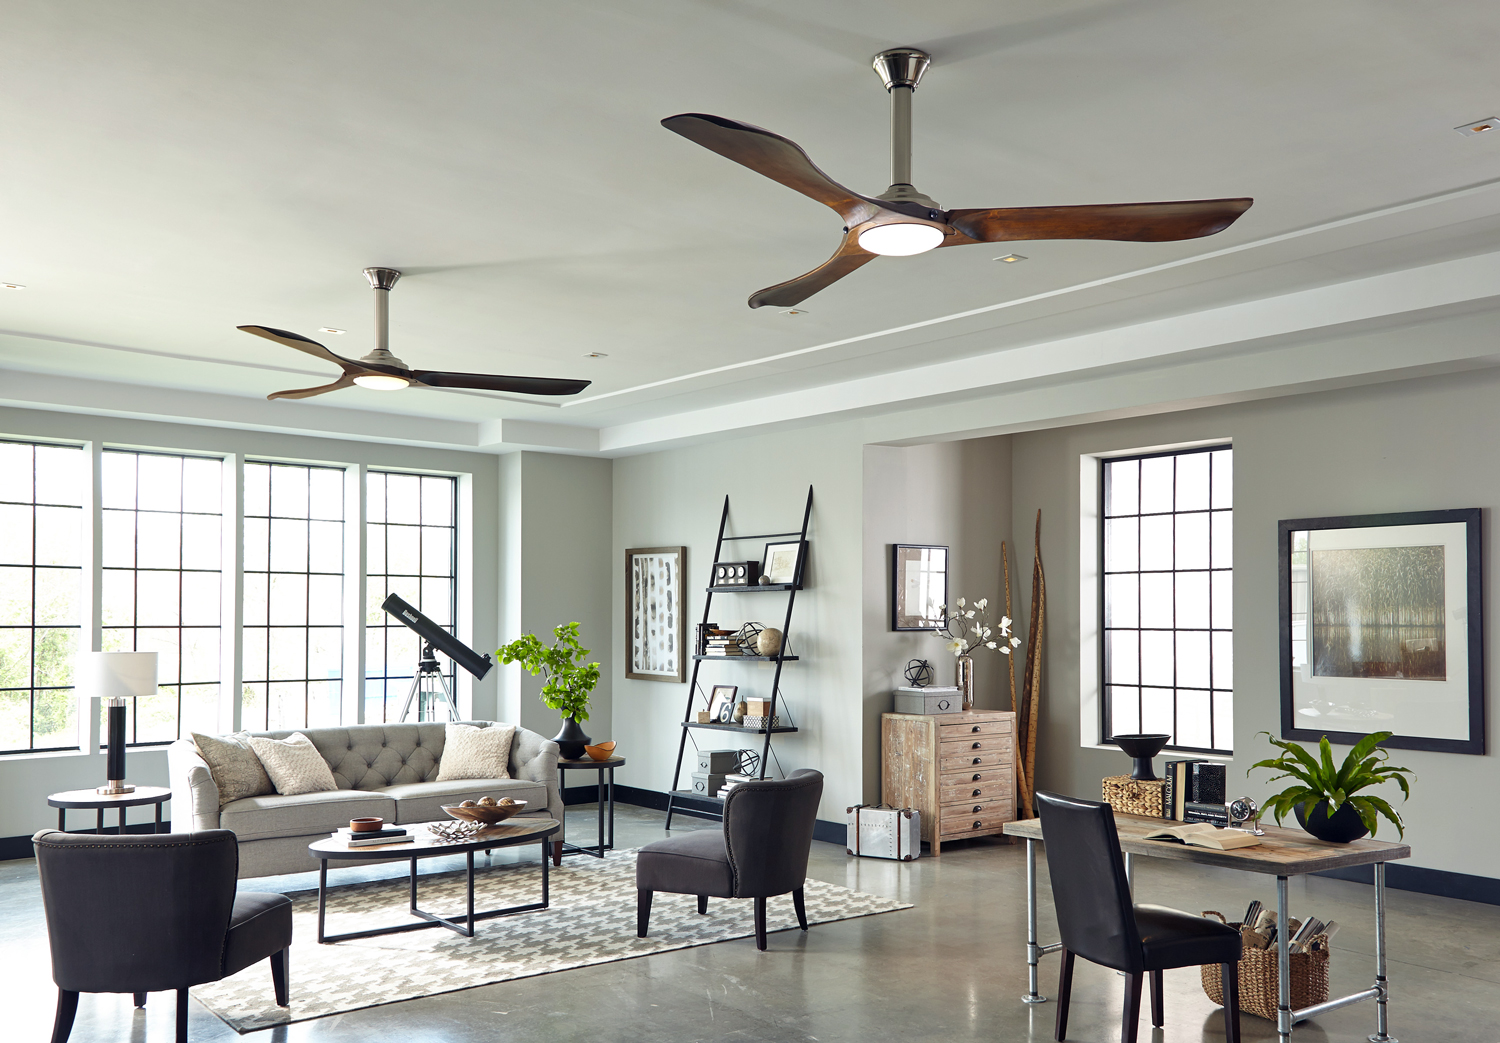 Minimalist Max Ceiling Fans in an open living room.